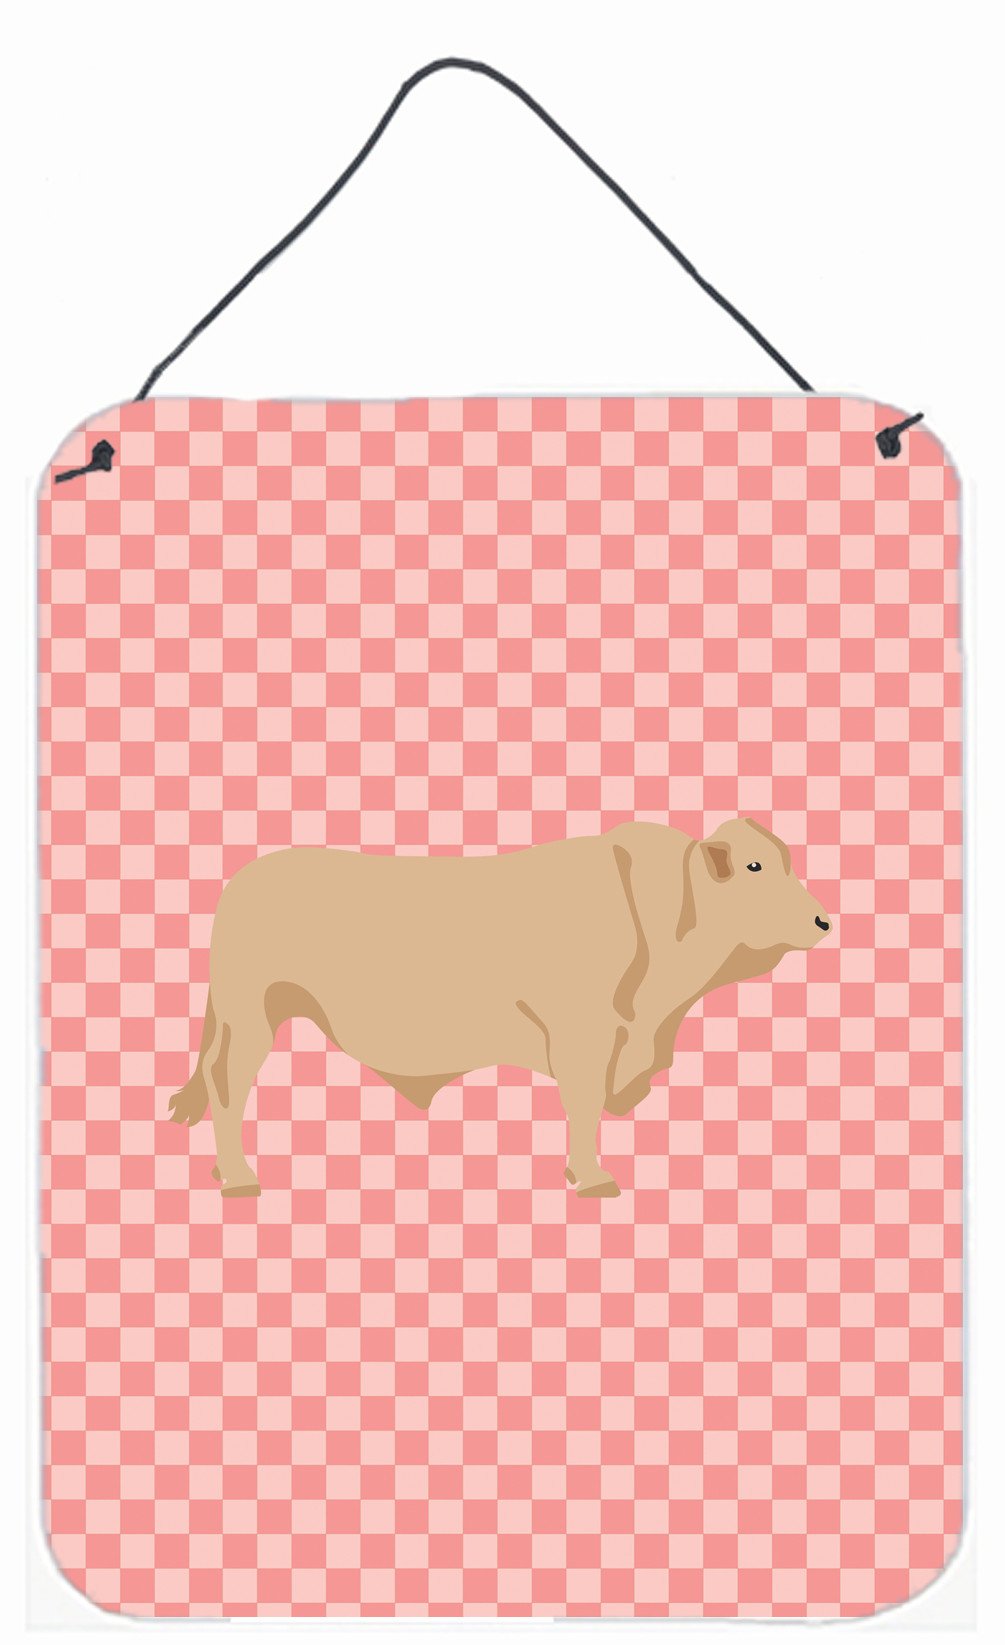 Charolais Cow Pink Check Wall or Door Hanging Prints BB7826DS1216 by Caroline's Treasures